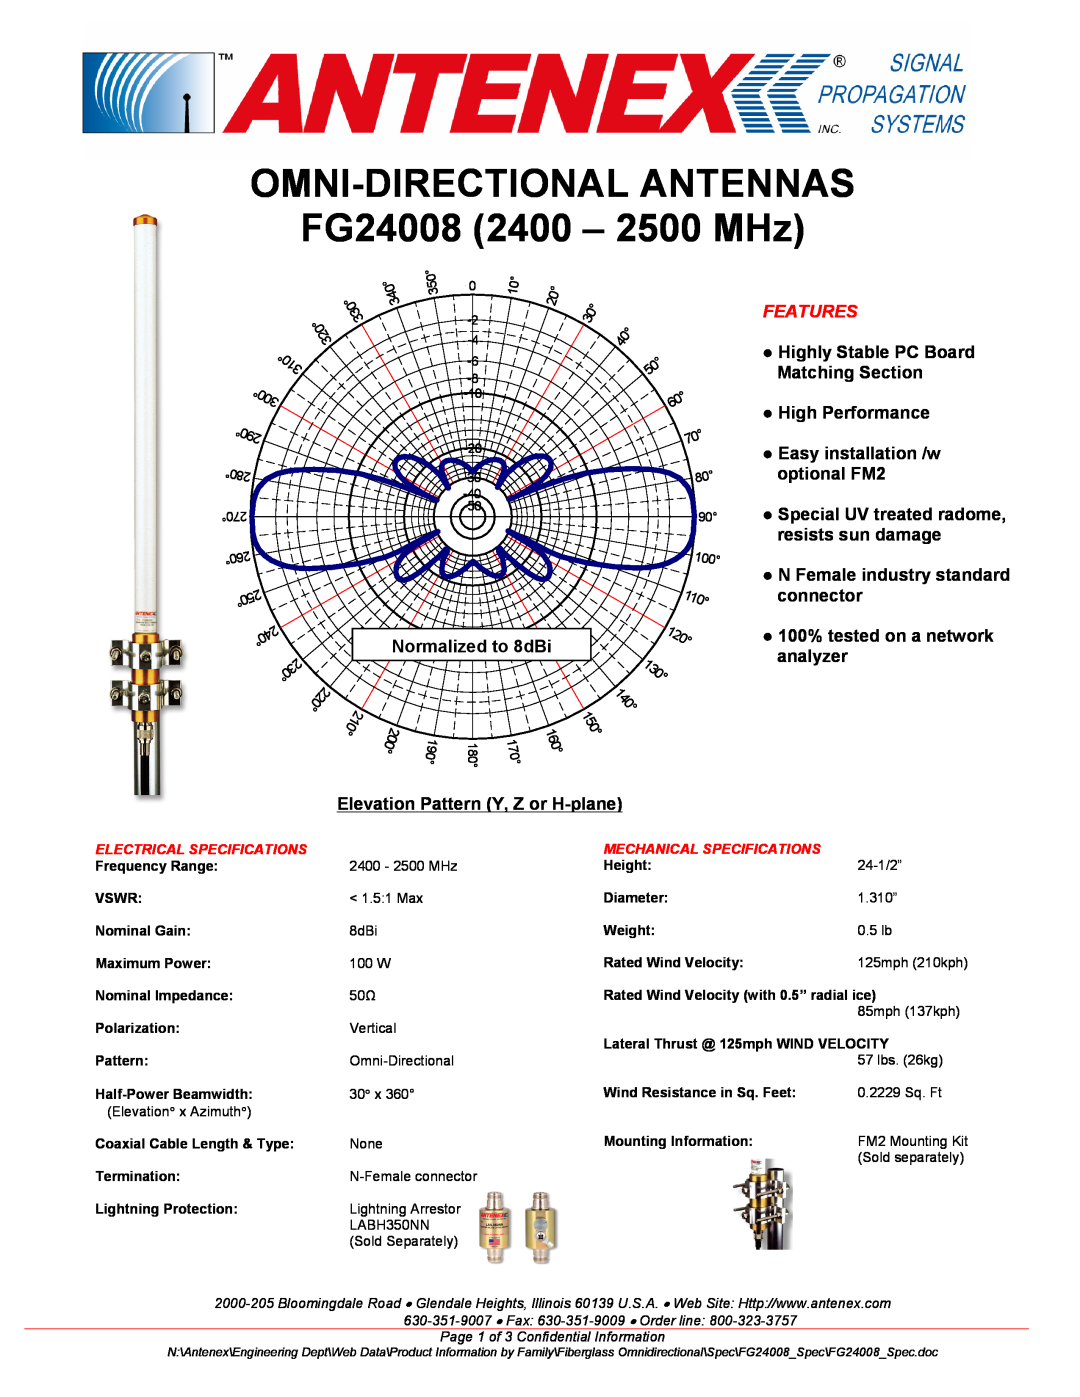 B&B Electronics specifications OMNI-DIRECTIONALANTENNAS FG24008 2400 - 2500 MHz, Normalized to 8dBi, High Performance 